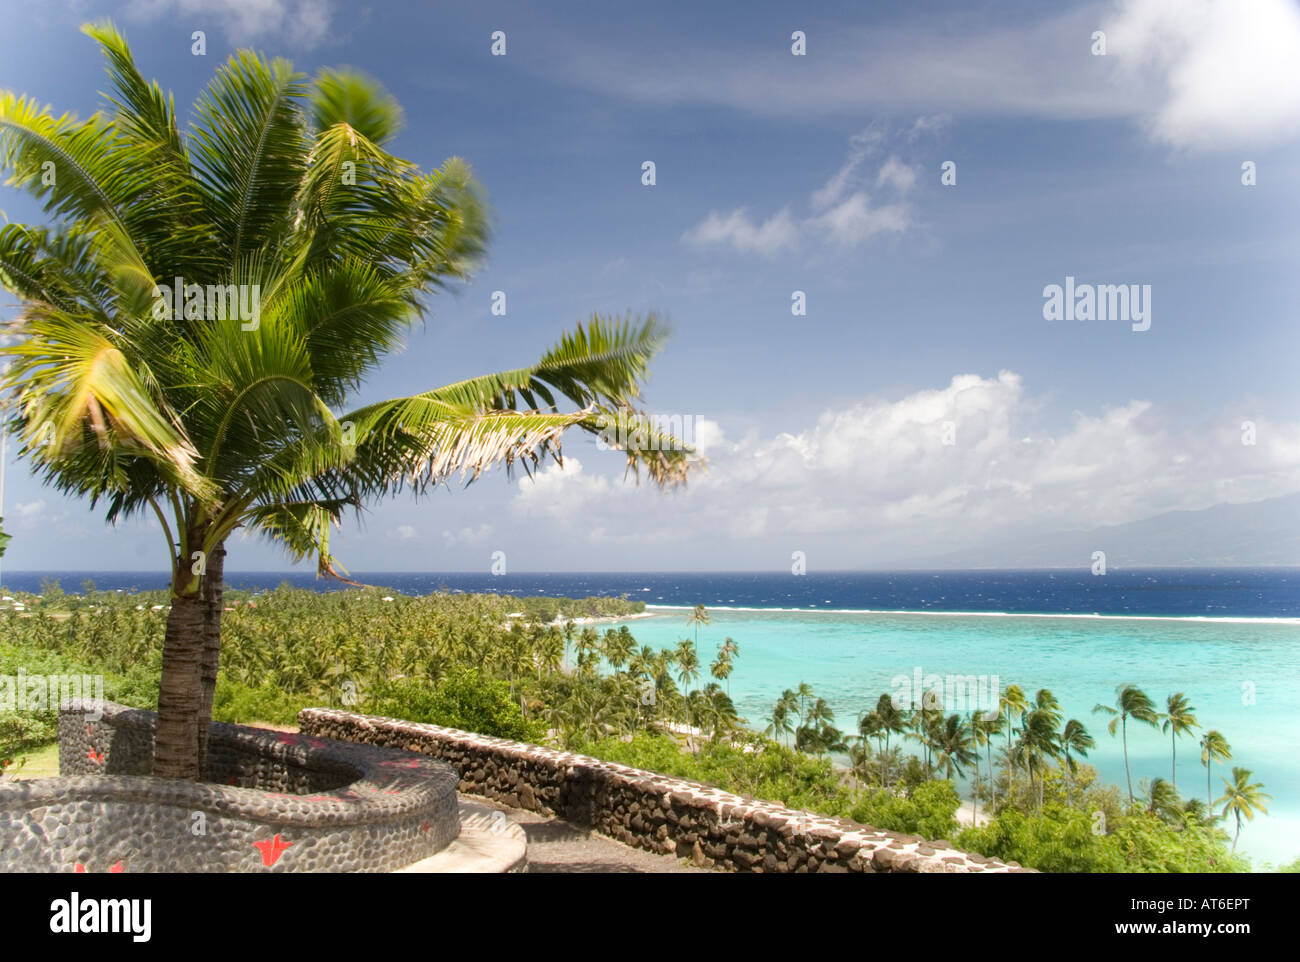 Scenic views of the Sofitel Hotel resort in the South Seas island of Moorea in French Plynesia in the South Pacific Ocean Stock Photo